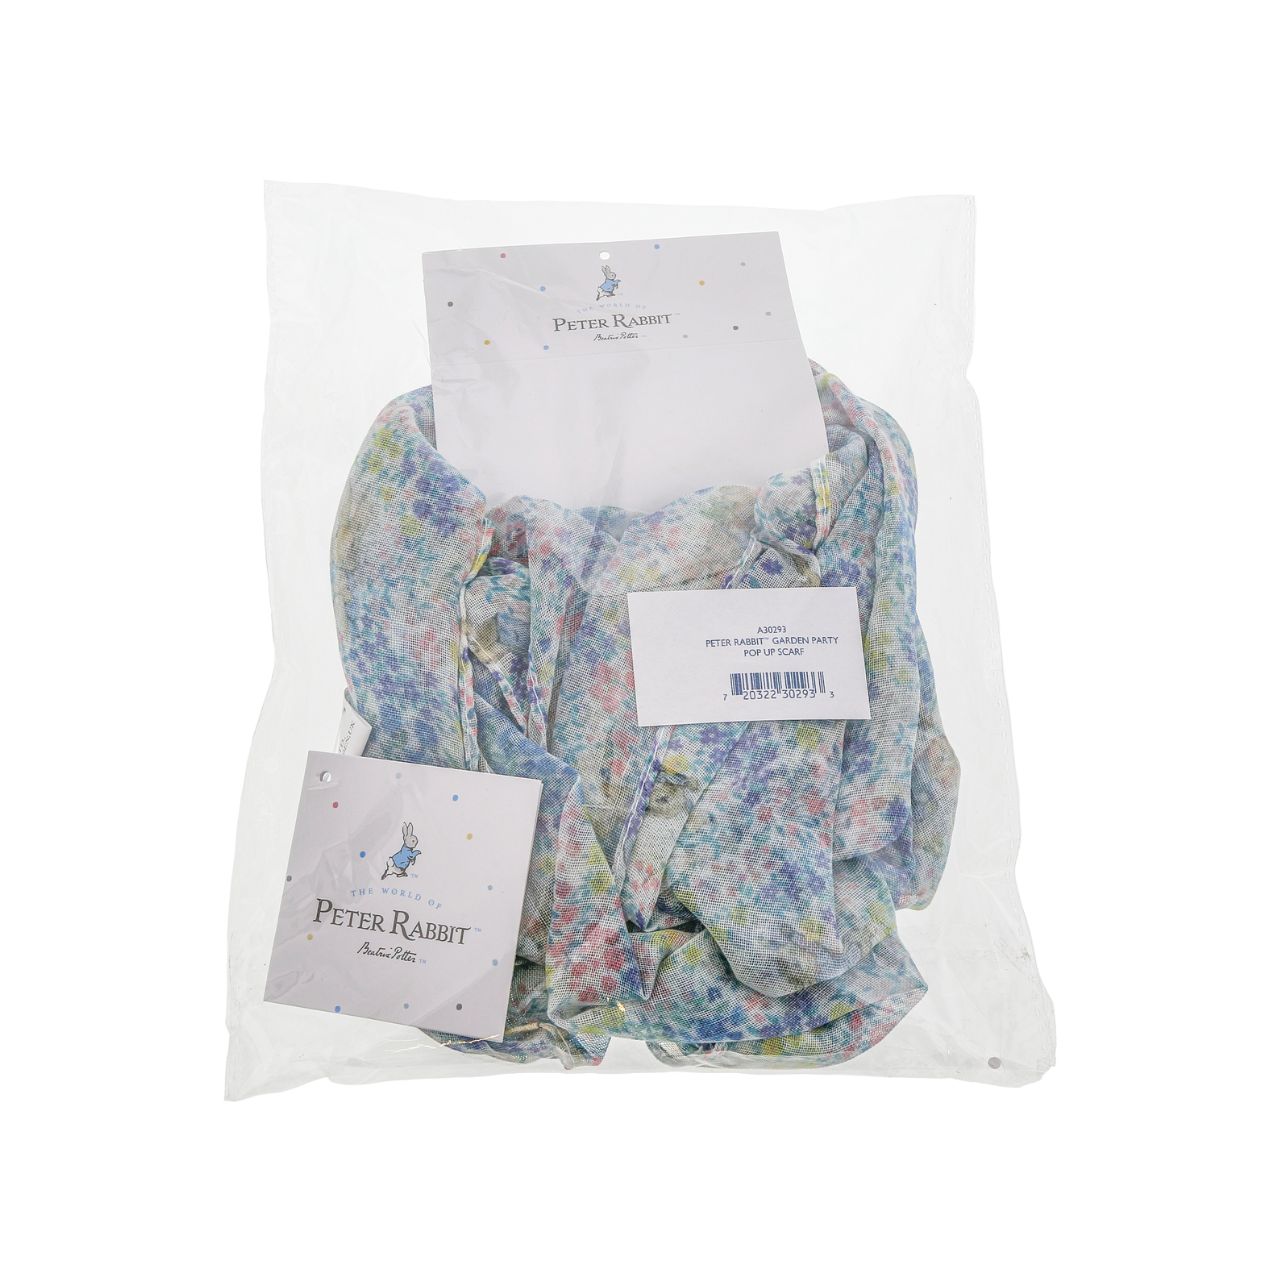 This beautifully made Peter Rabbit Garden Party Pop Up Scarf would be a wonderful addition to any outfit. Why not team up with our other Garden Party Pop Up accessories to create a co ordinating outfit or gift.